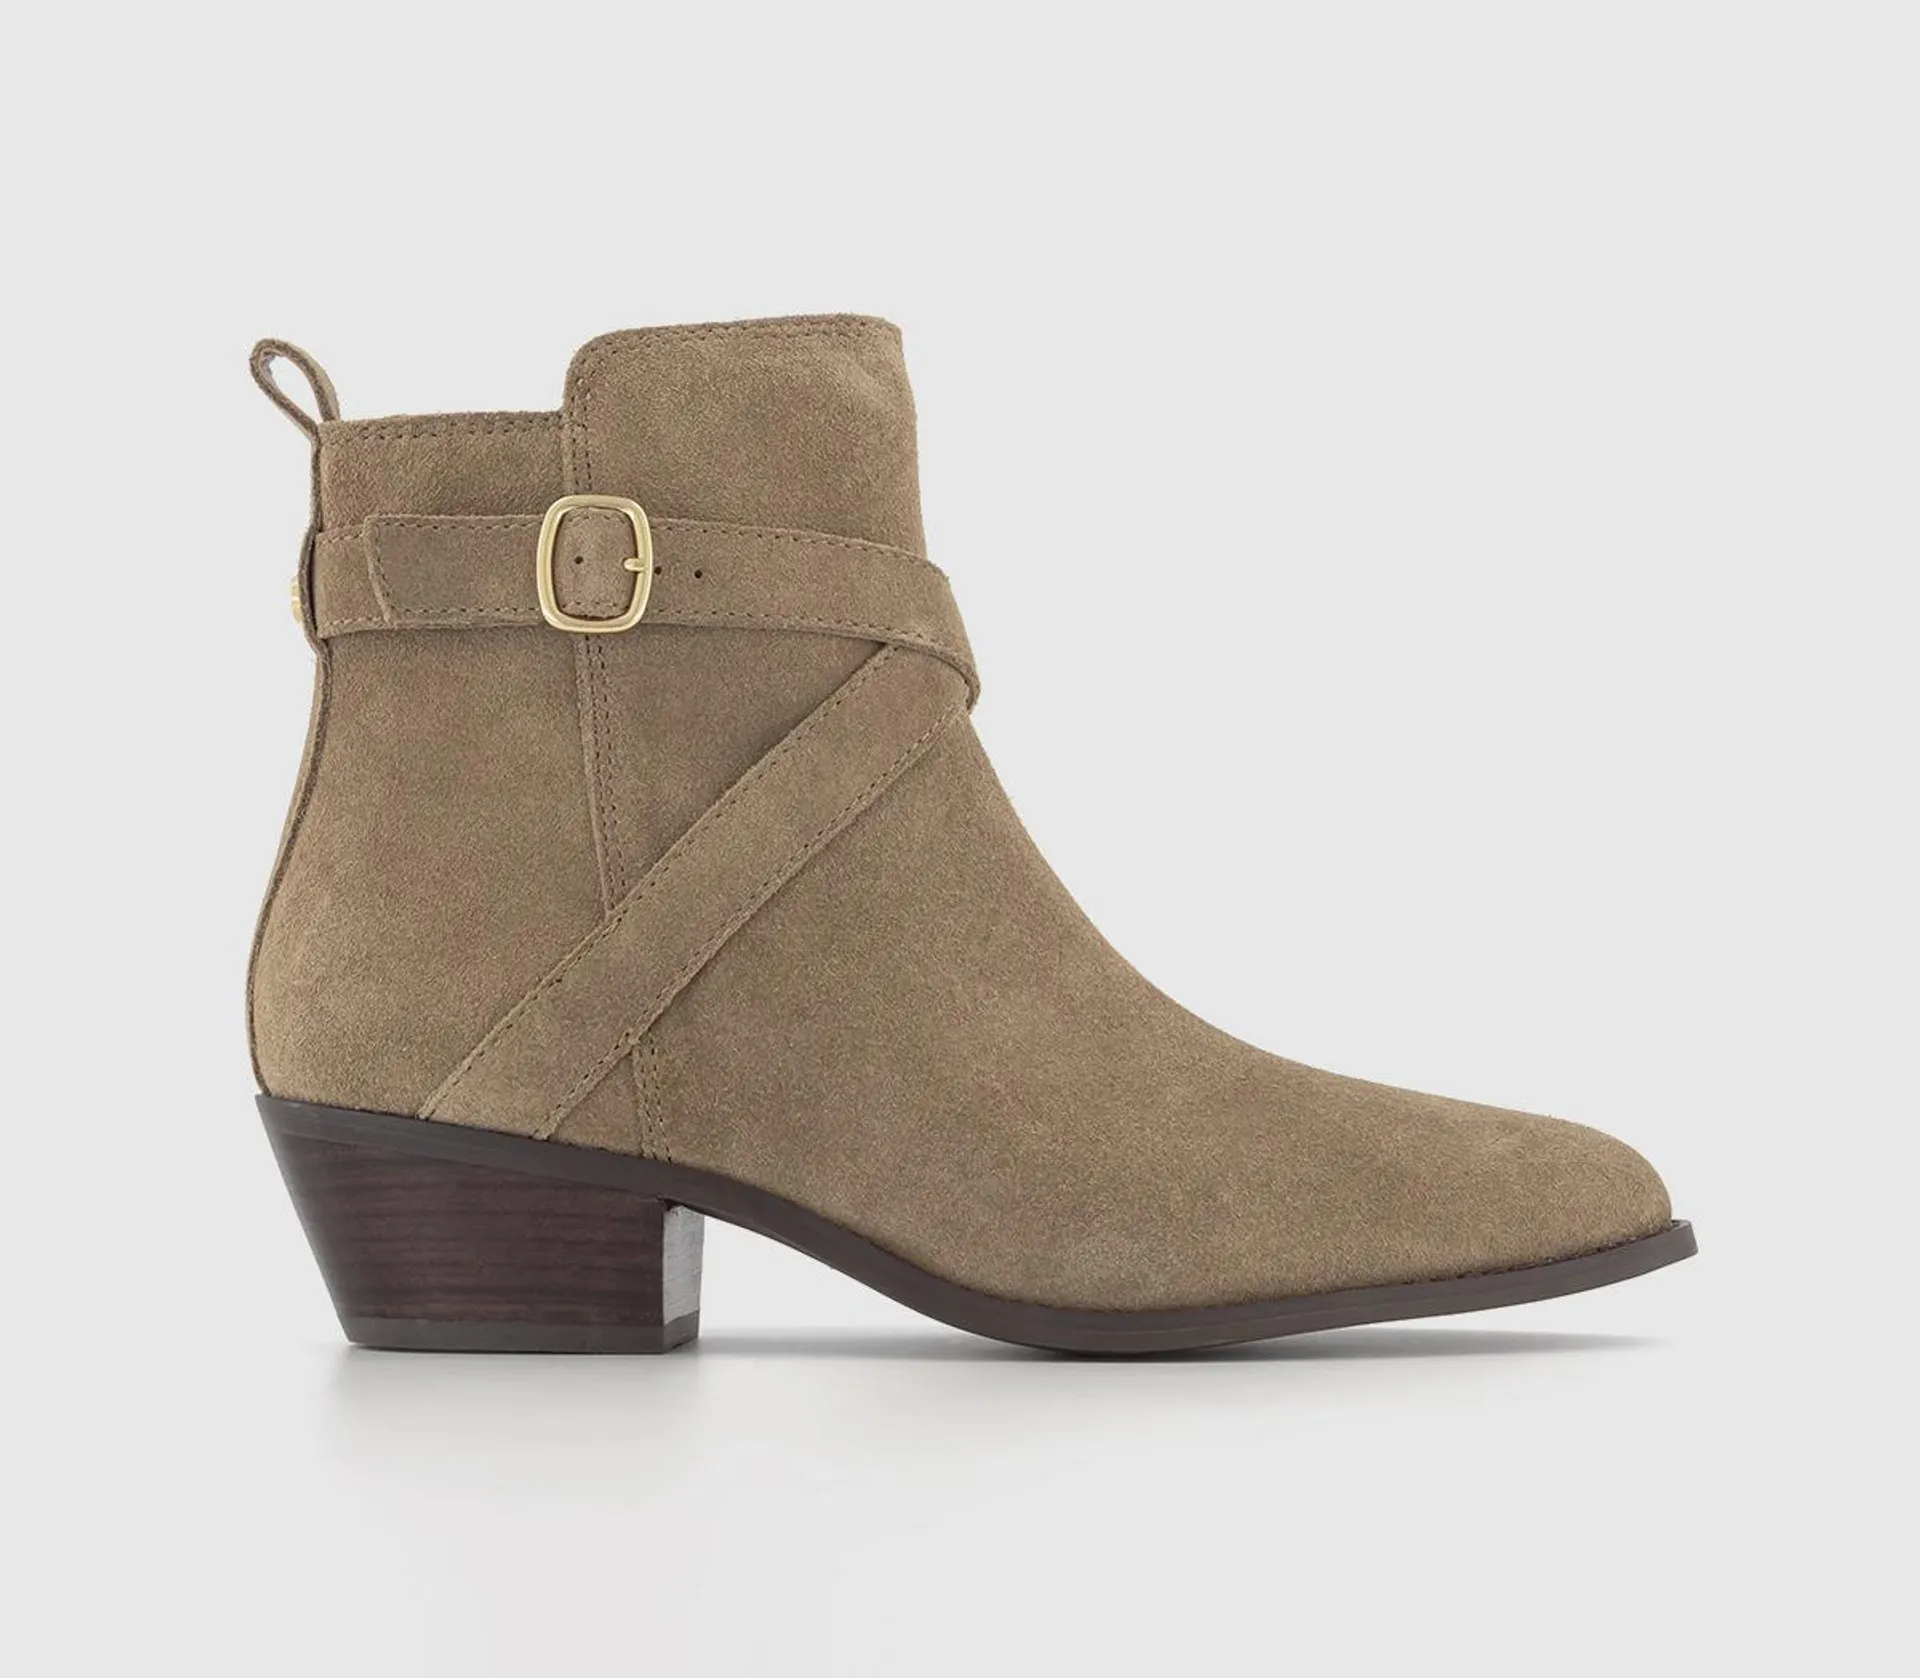 Arcade Strap Detail Pointed Toe Ankle Boots